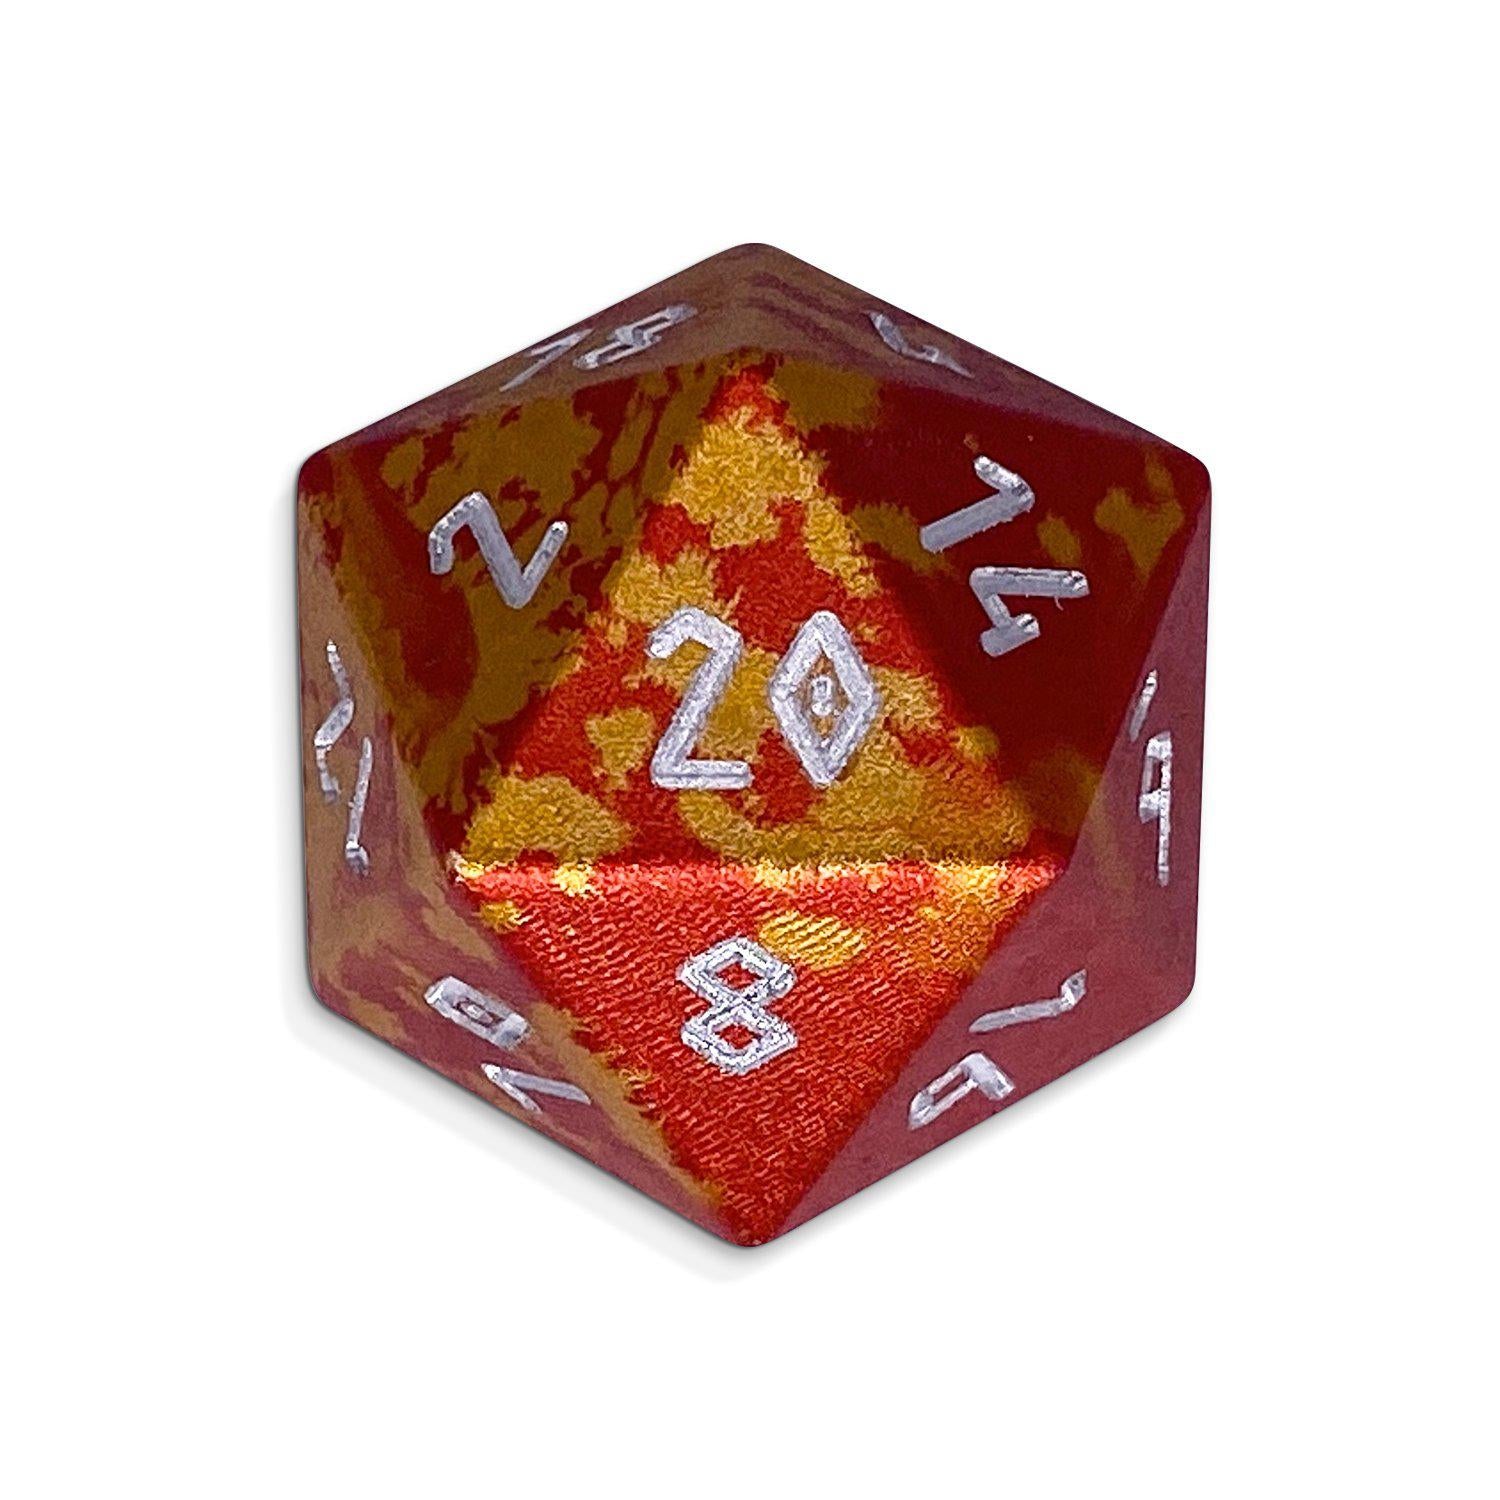 Single Wondrous Dice® D20 in Phoenix Tears by Norse Foundry® 6063 Aircraft Grade Aluminum